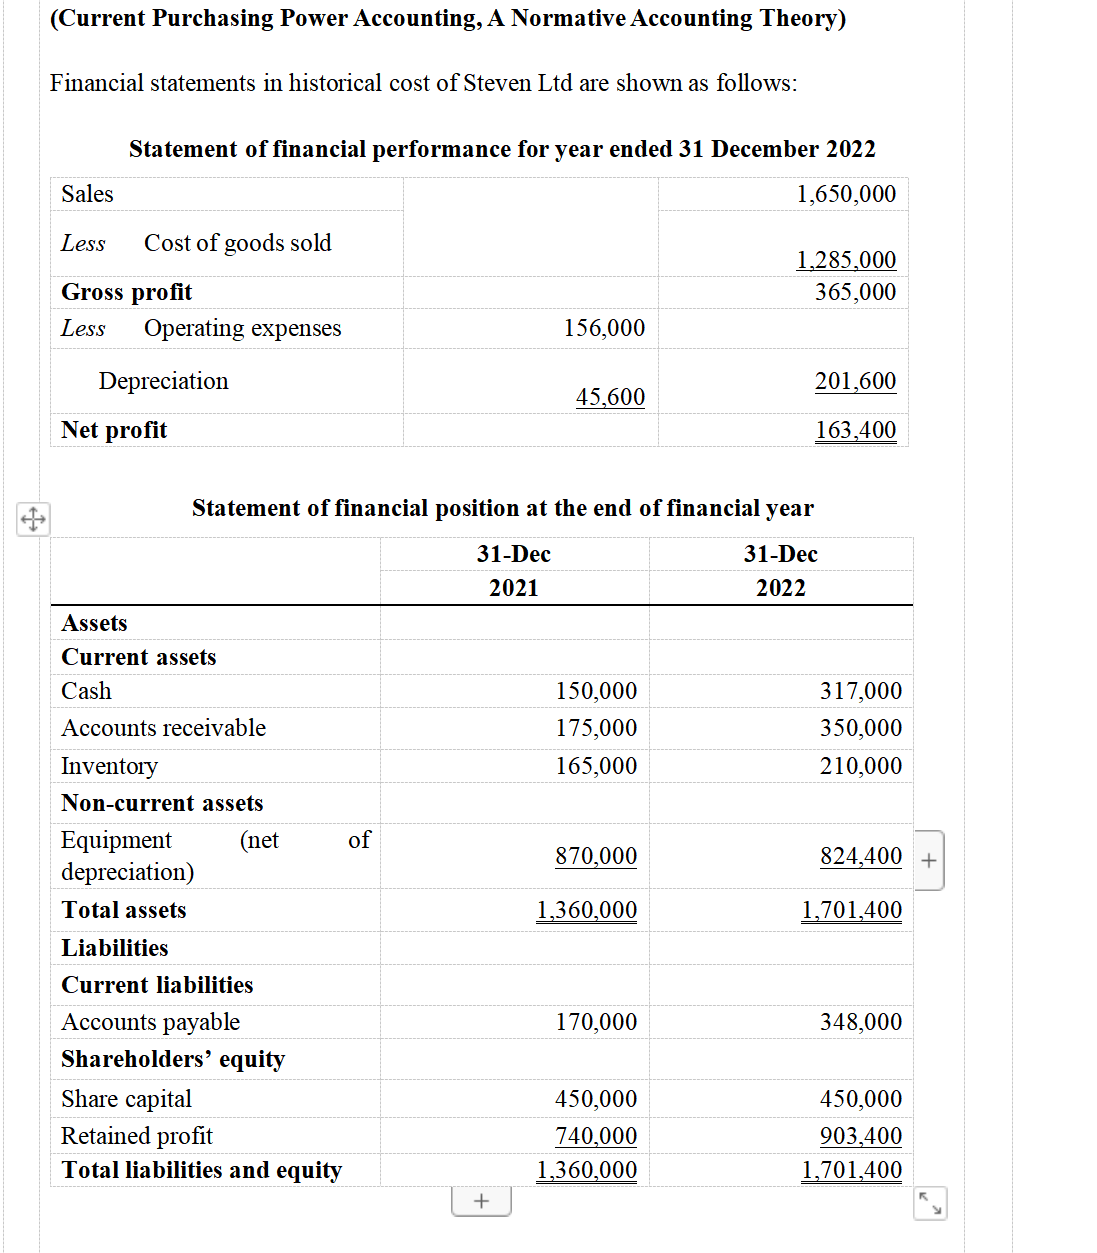 (Current Purchasing Power Accounting, A Normative Accounting Theory)
Financial statements in historical cost of Steven Ltd are shown as follows:
Statement of financial performance for year ended 31 December 2022
Sales
1,650,000
Less Cost of goods sold
1,285,000
Gross profit
365,000
Less
Operating expenses
156,000
201,600
45,600
163,400
Statement of financial position at the end of financial year
31-Dec
31-Dec
2021
2022
150,000
175,000
165,000
870,000
1,360,000
170,000
450,000
740,000
1,360,000
Depreciation
Net profit
Assets
Current assets
Cash
Accounts receivable
Inventory
Non-current assets
Equipment
(net
depreciation)
Total assets
Liabilities
Current liabilities
Accounts payable
Shareholders' equity
Share capital
Retained profit
Total liabilities and equity
of
+
317,000
350,000
210,000
824,400 +
1,701,400
348,000
450,000
903,400
1,701,400
K